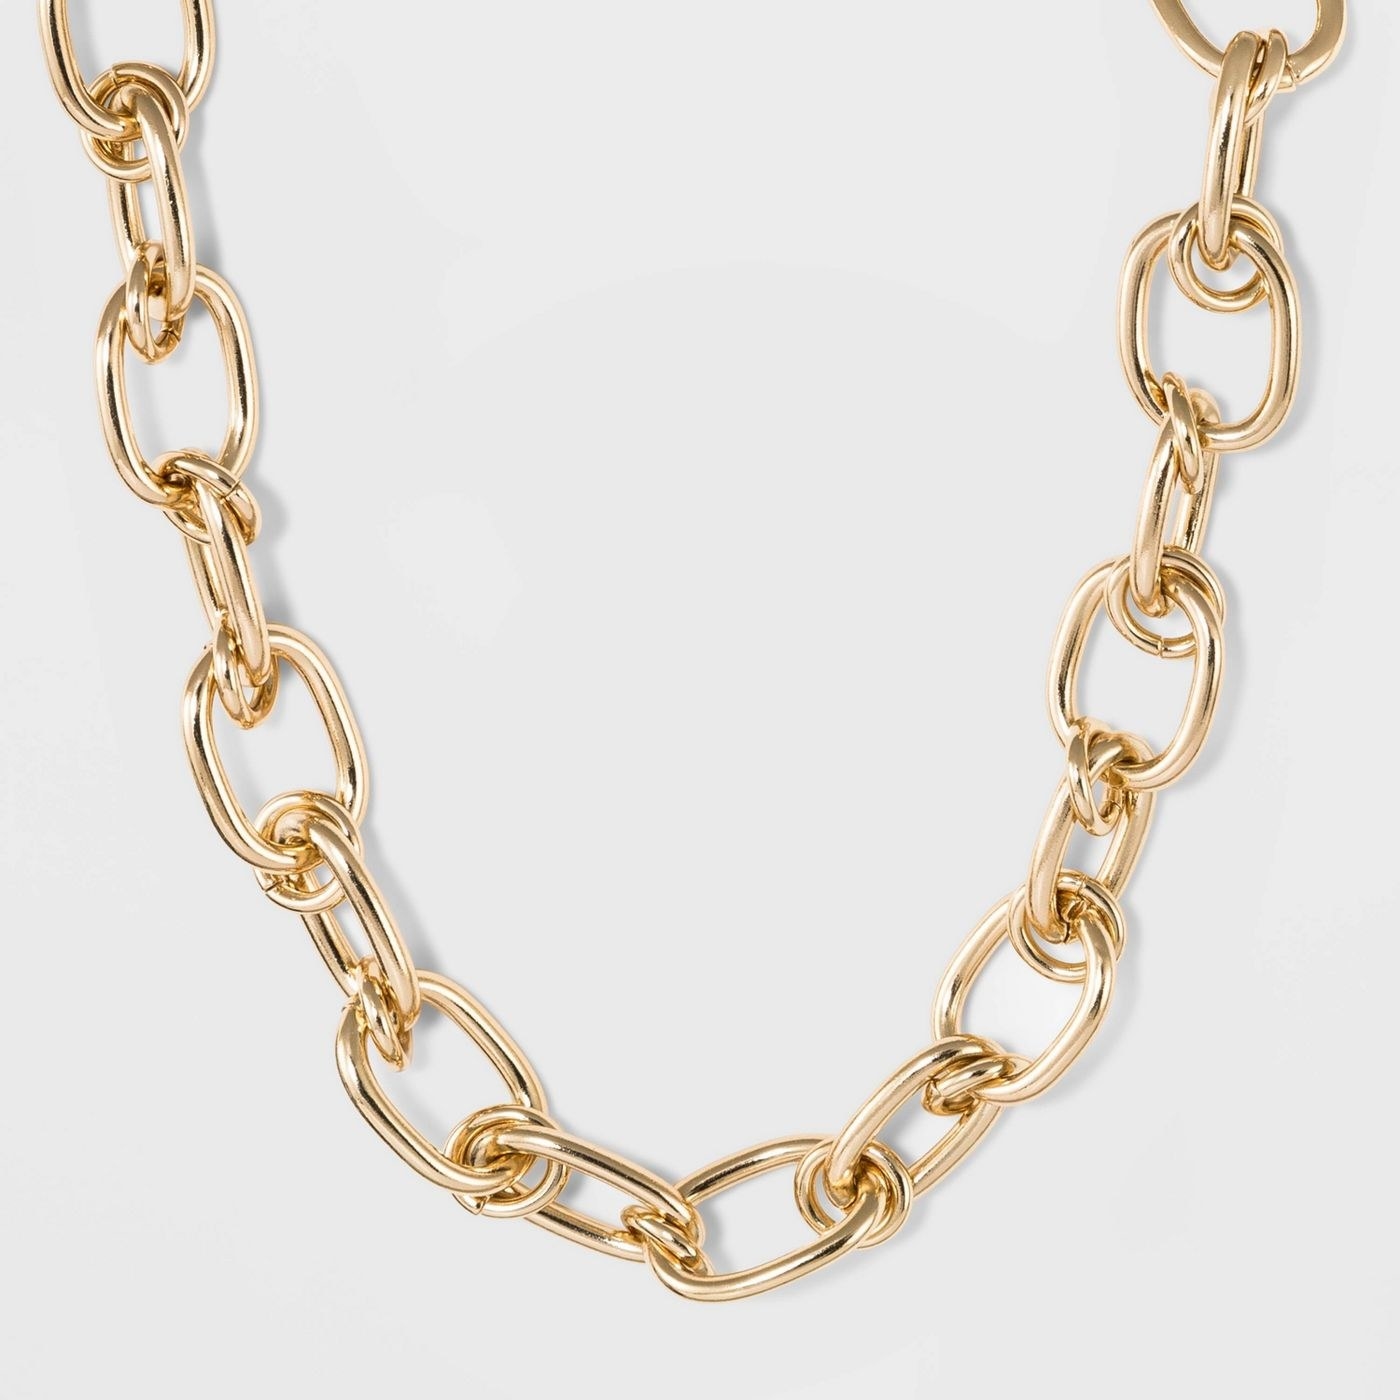 Chainlink necklace 